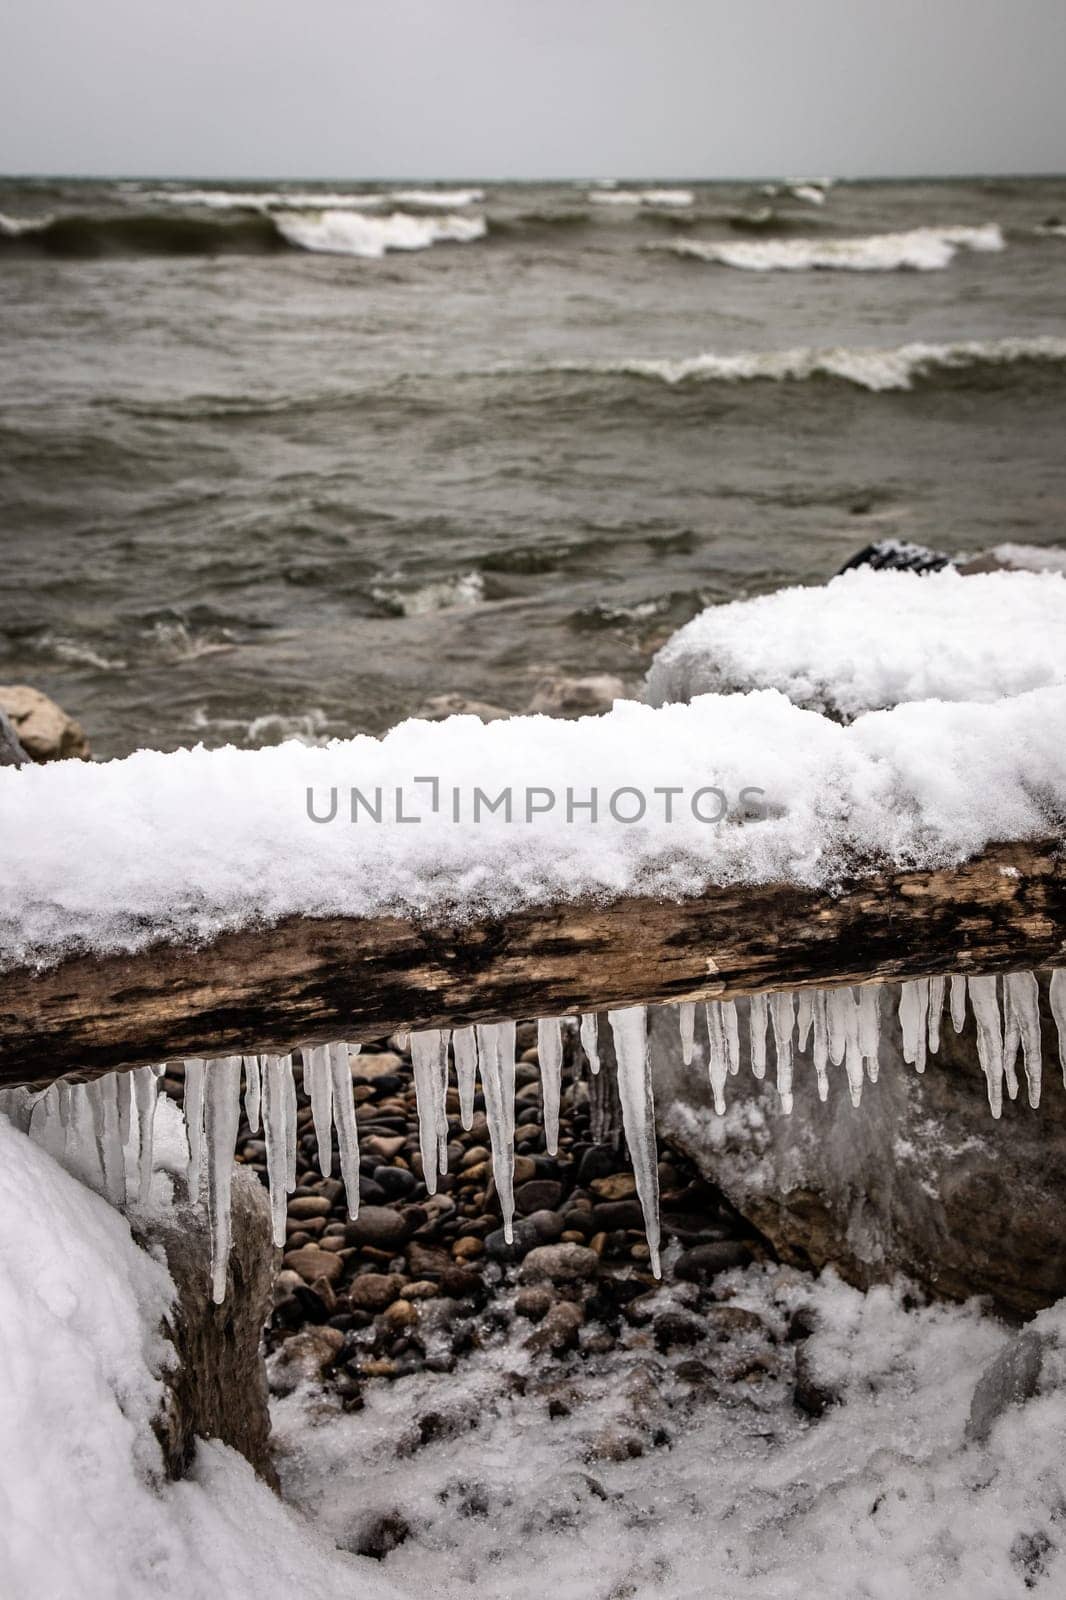 Log covered by snow and ice with waves coming in and ice on the shoreline, near Southampton in the Bruce Peninsula, Ontario. Canada